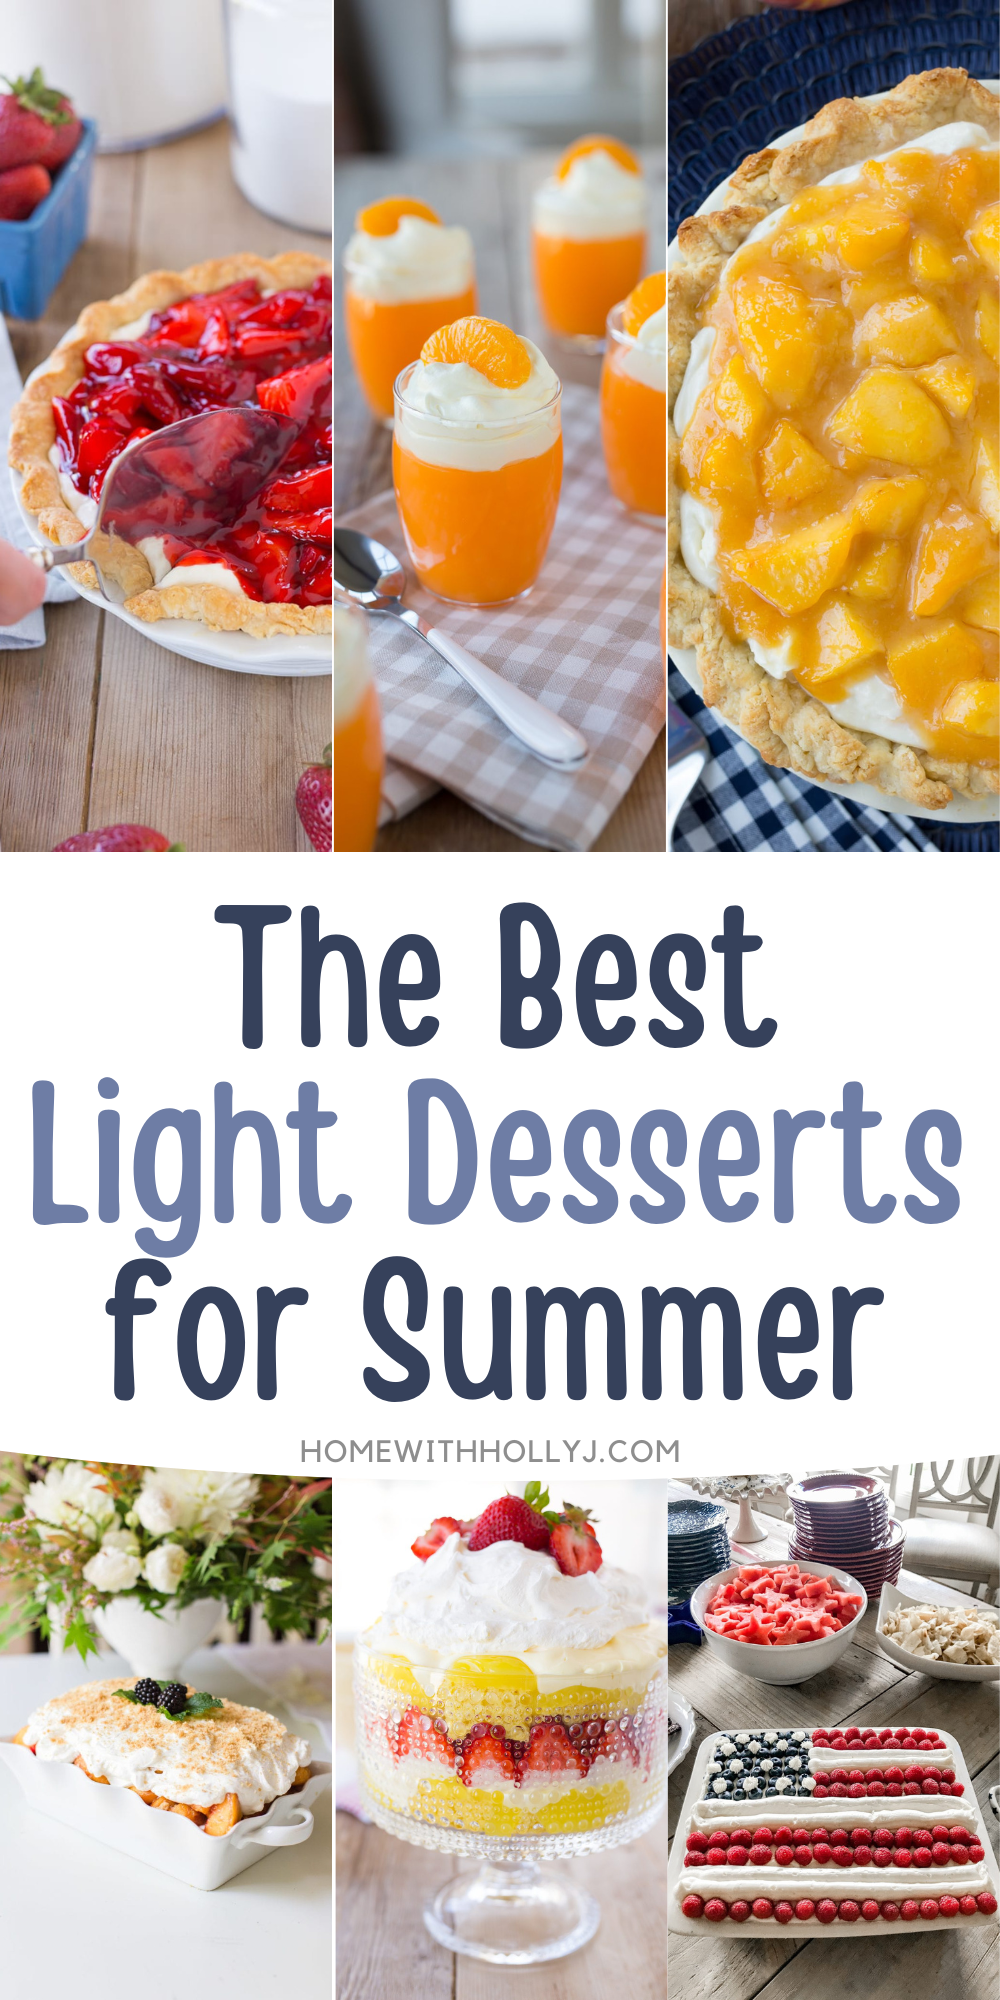 Satisfy your sweet tooth with these light desserts. Explore a variety of delightful recipes that are perfect for Summer.